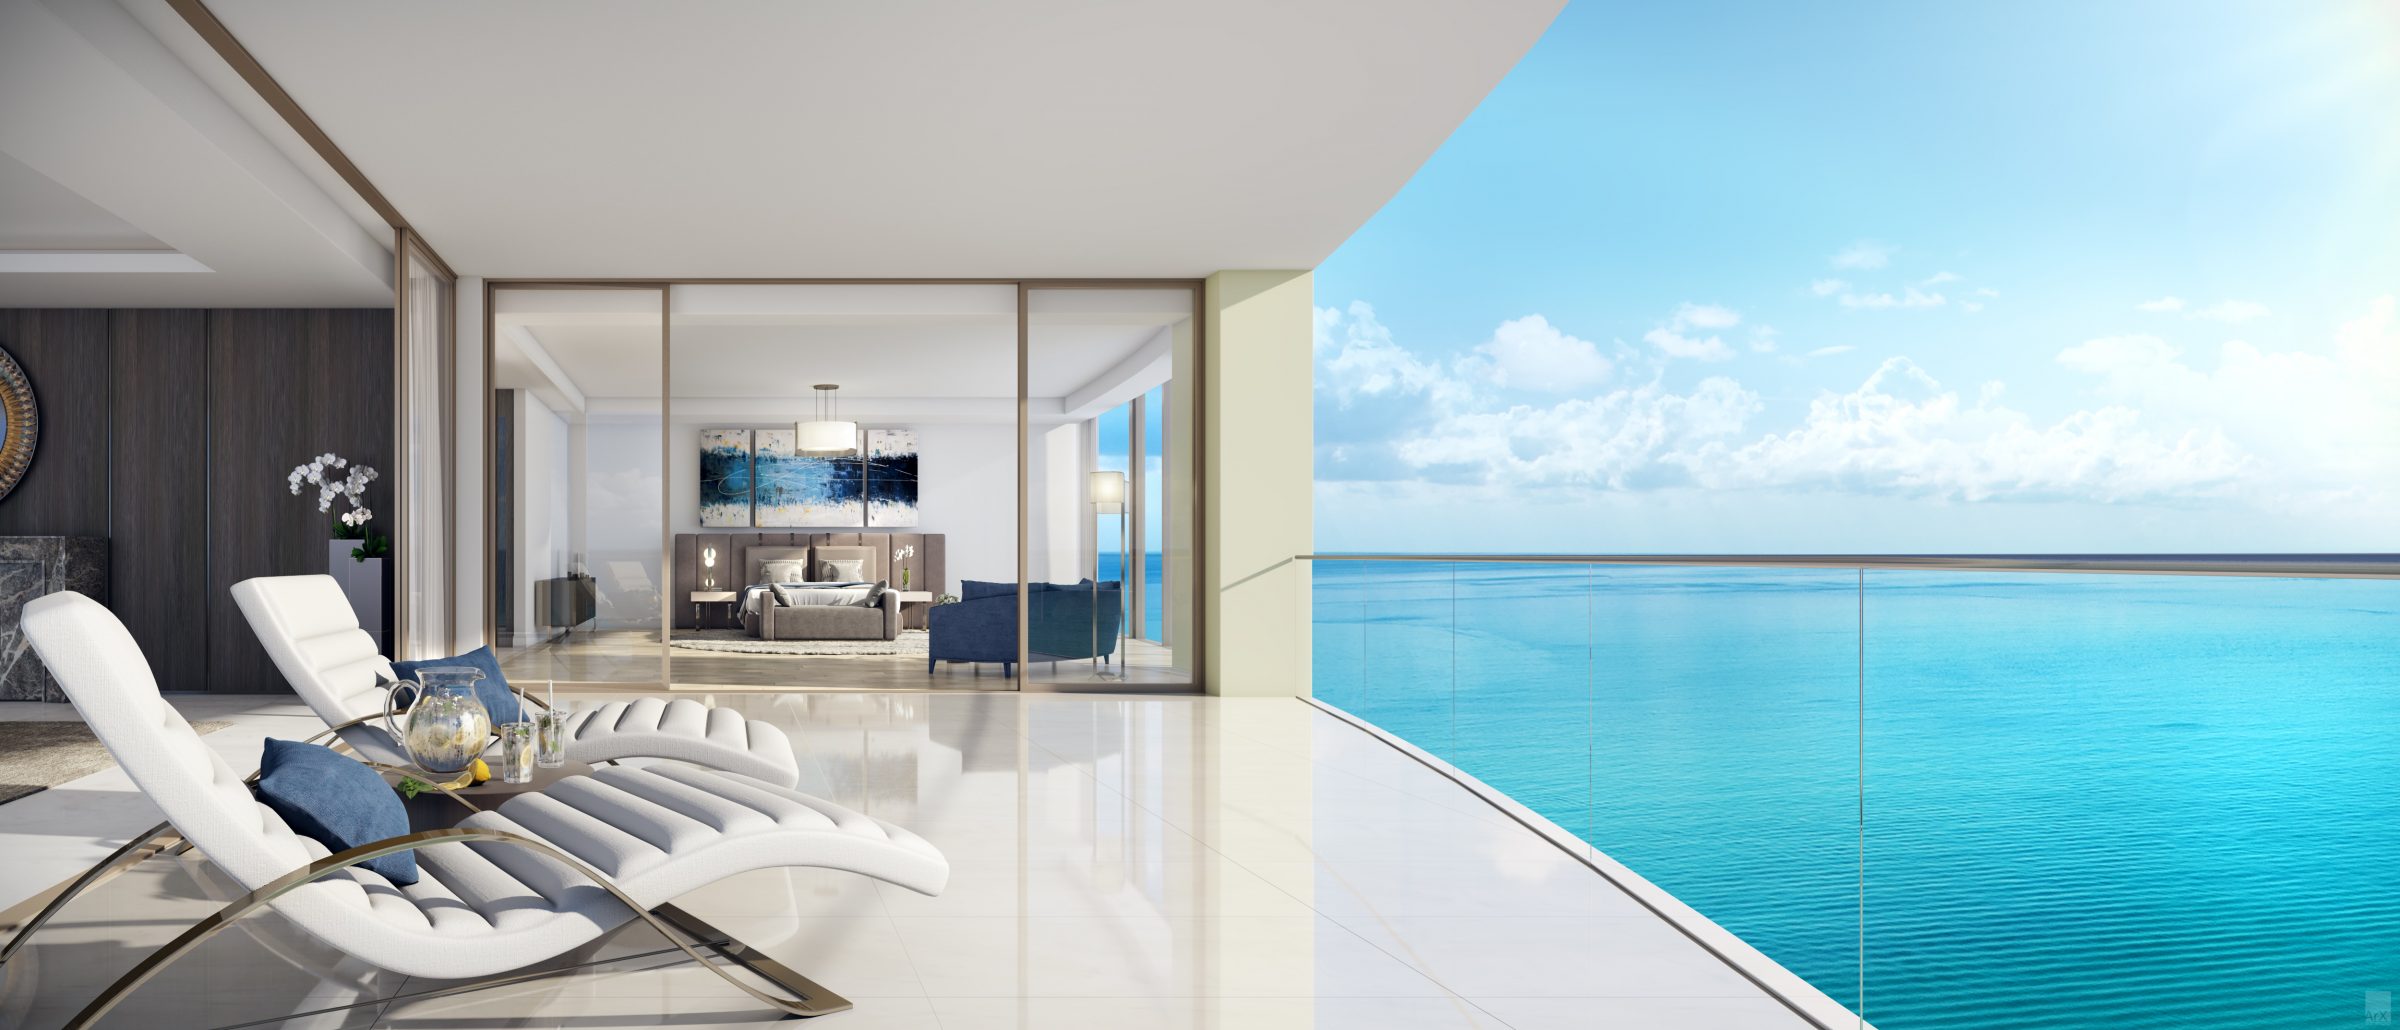 THE ESTATES AT ACQUALINA: EXPERIENCE UNMATCHED LUXURY